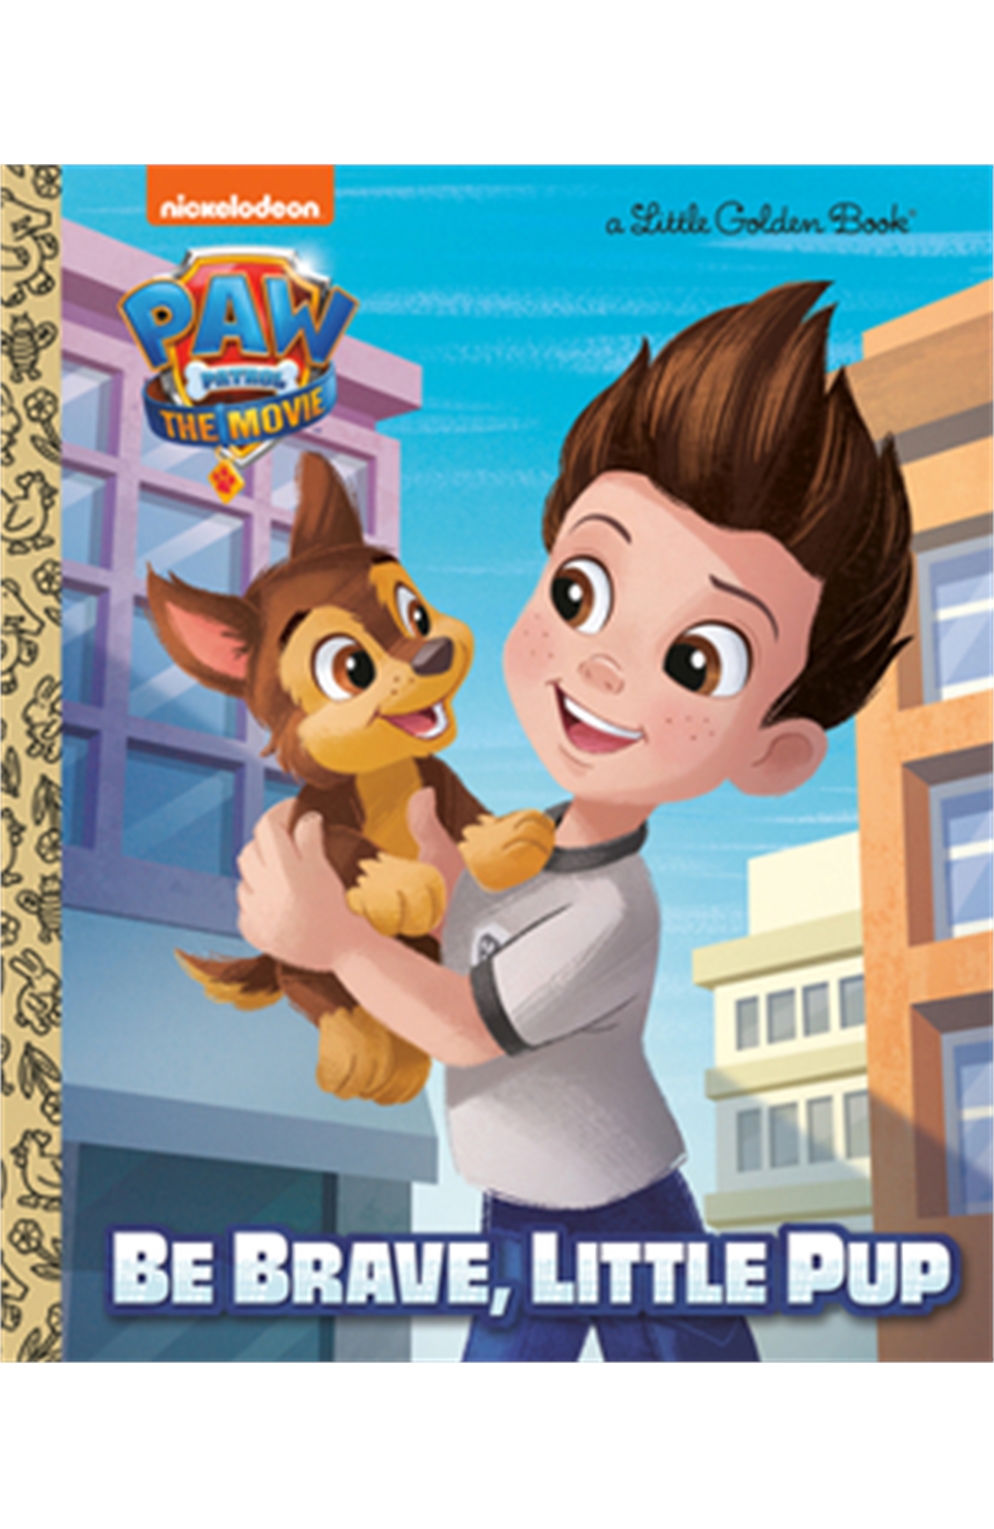 Golden Book Paw Patrol The Movie Be Brave, Little Pup Little